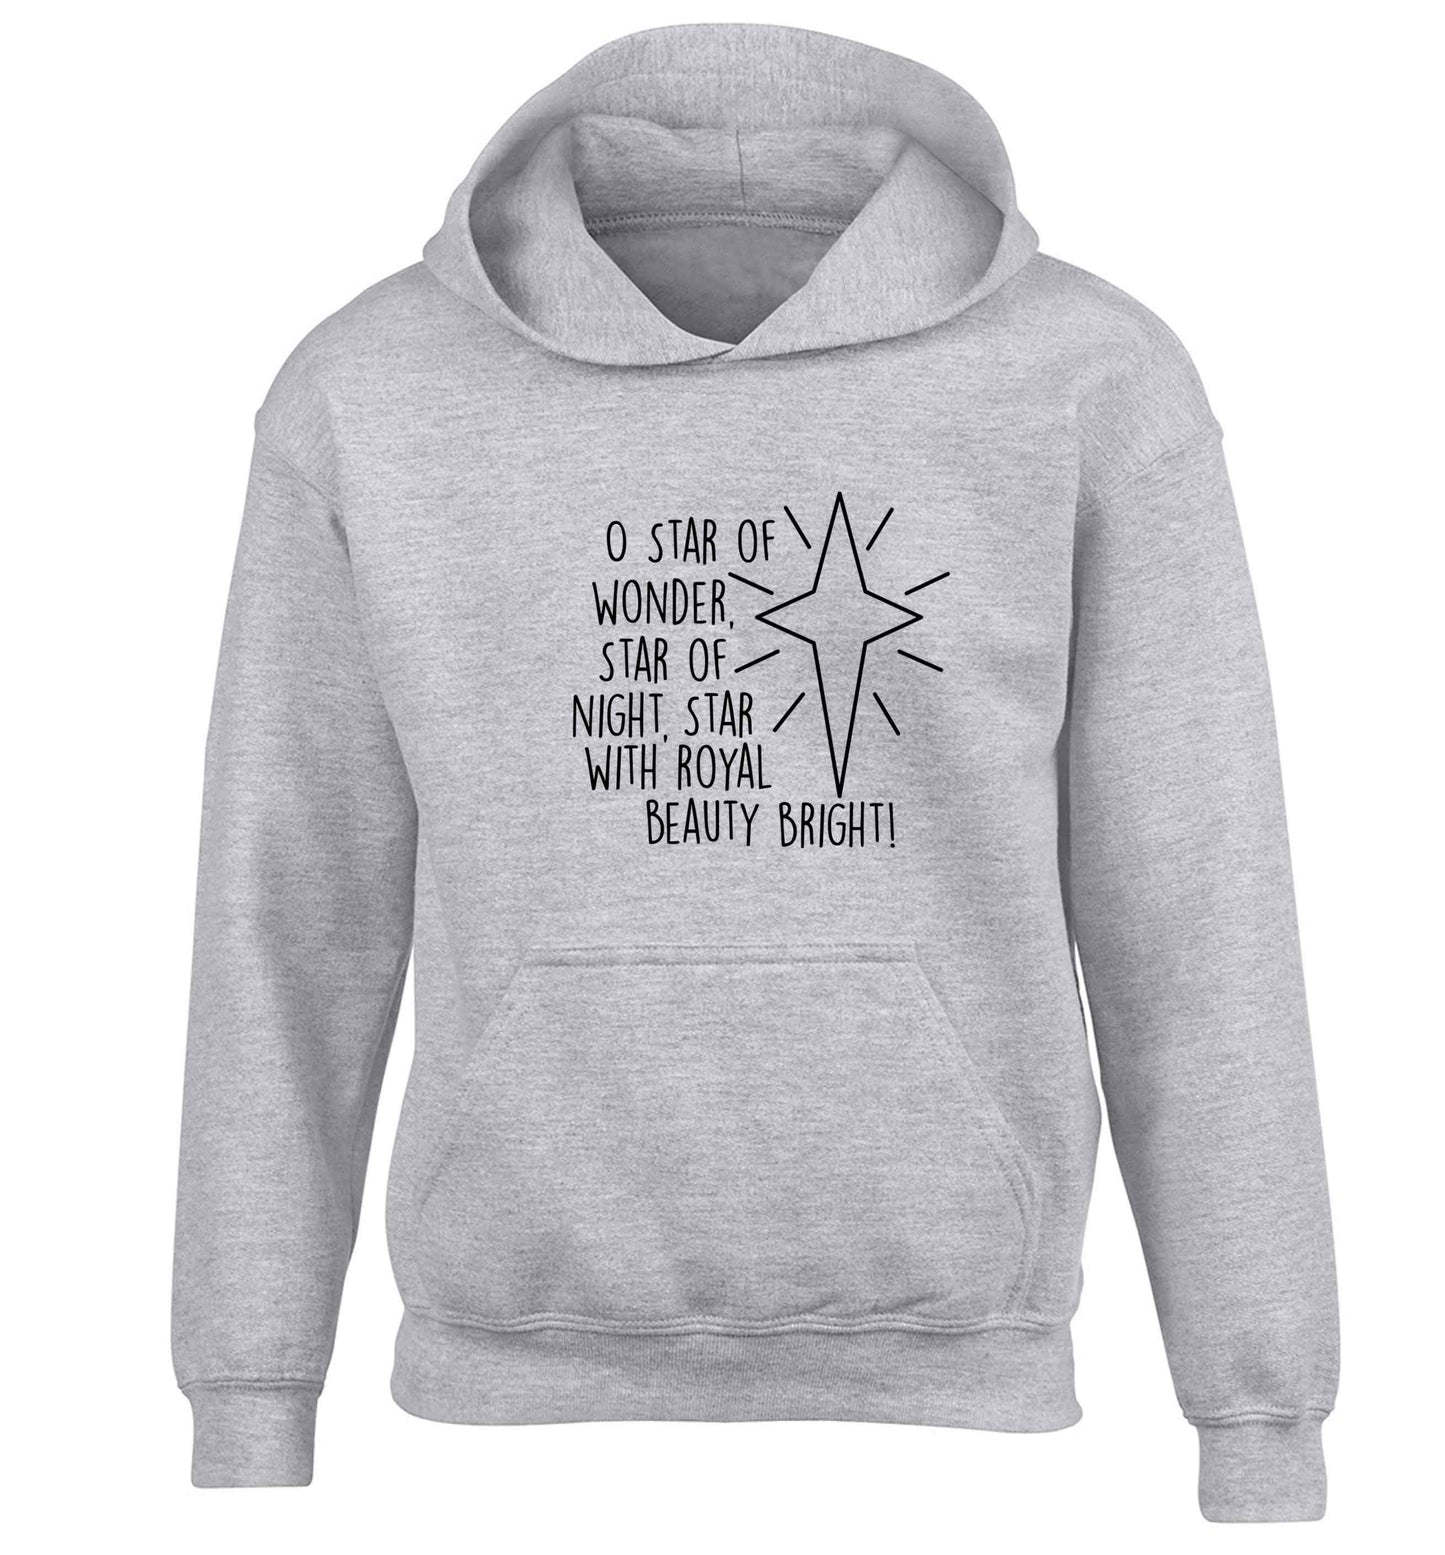 Oh star of wonder star of night, star with royal beauty bright children's grey hoodie 12-13 Years